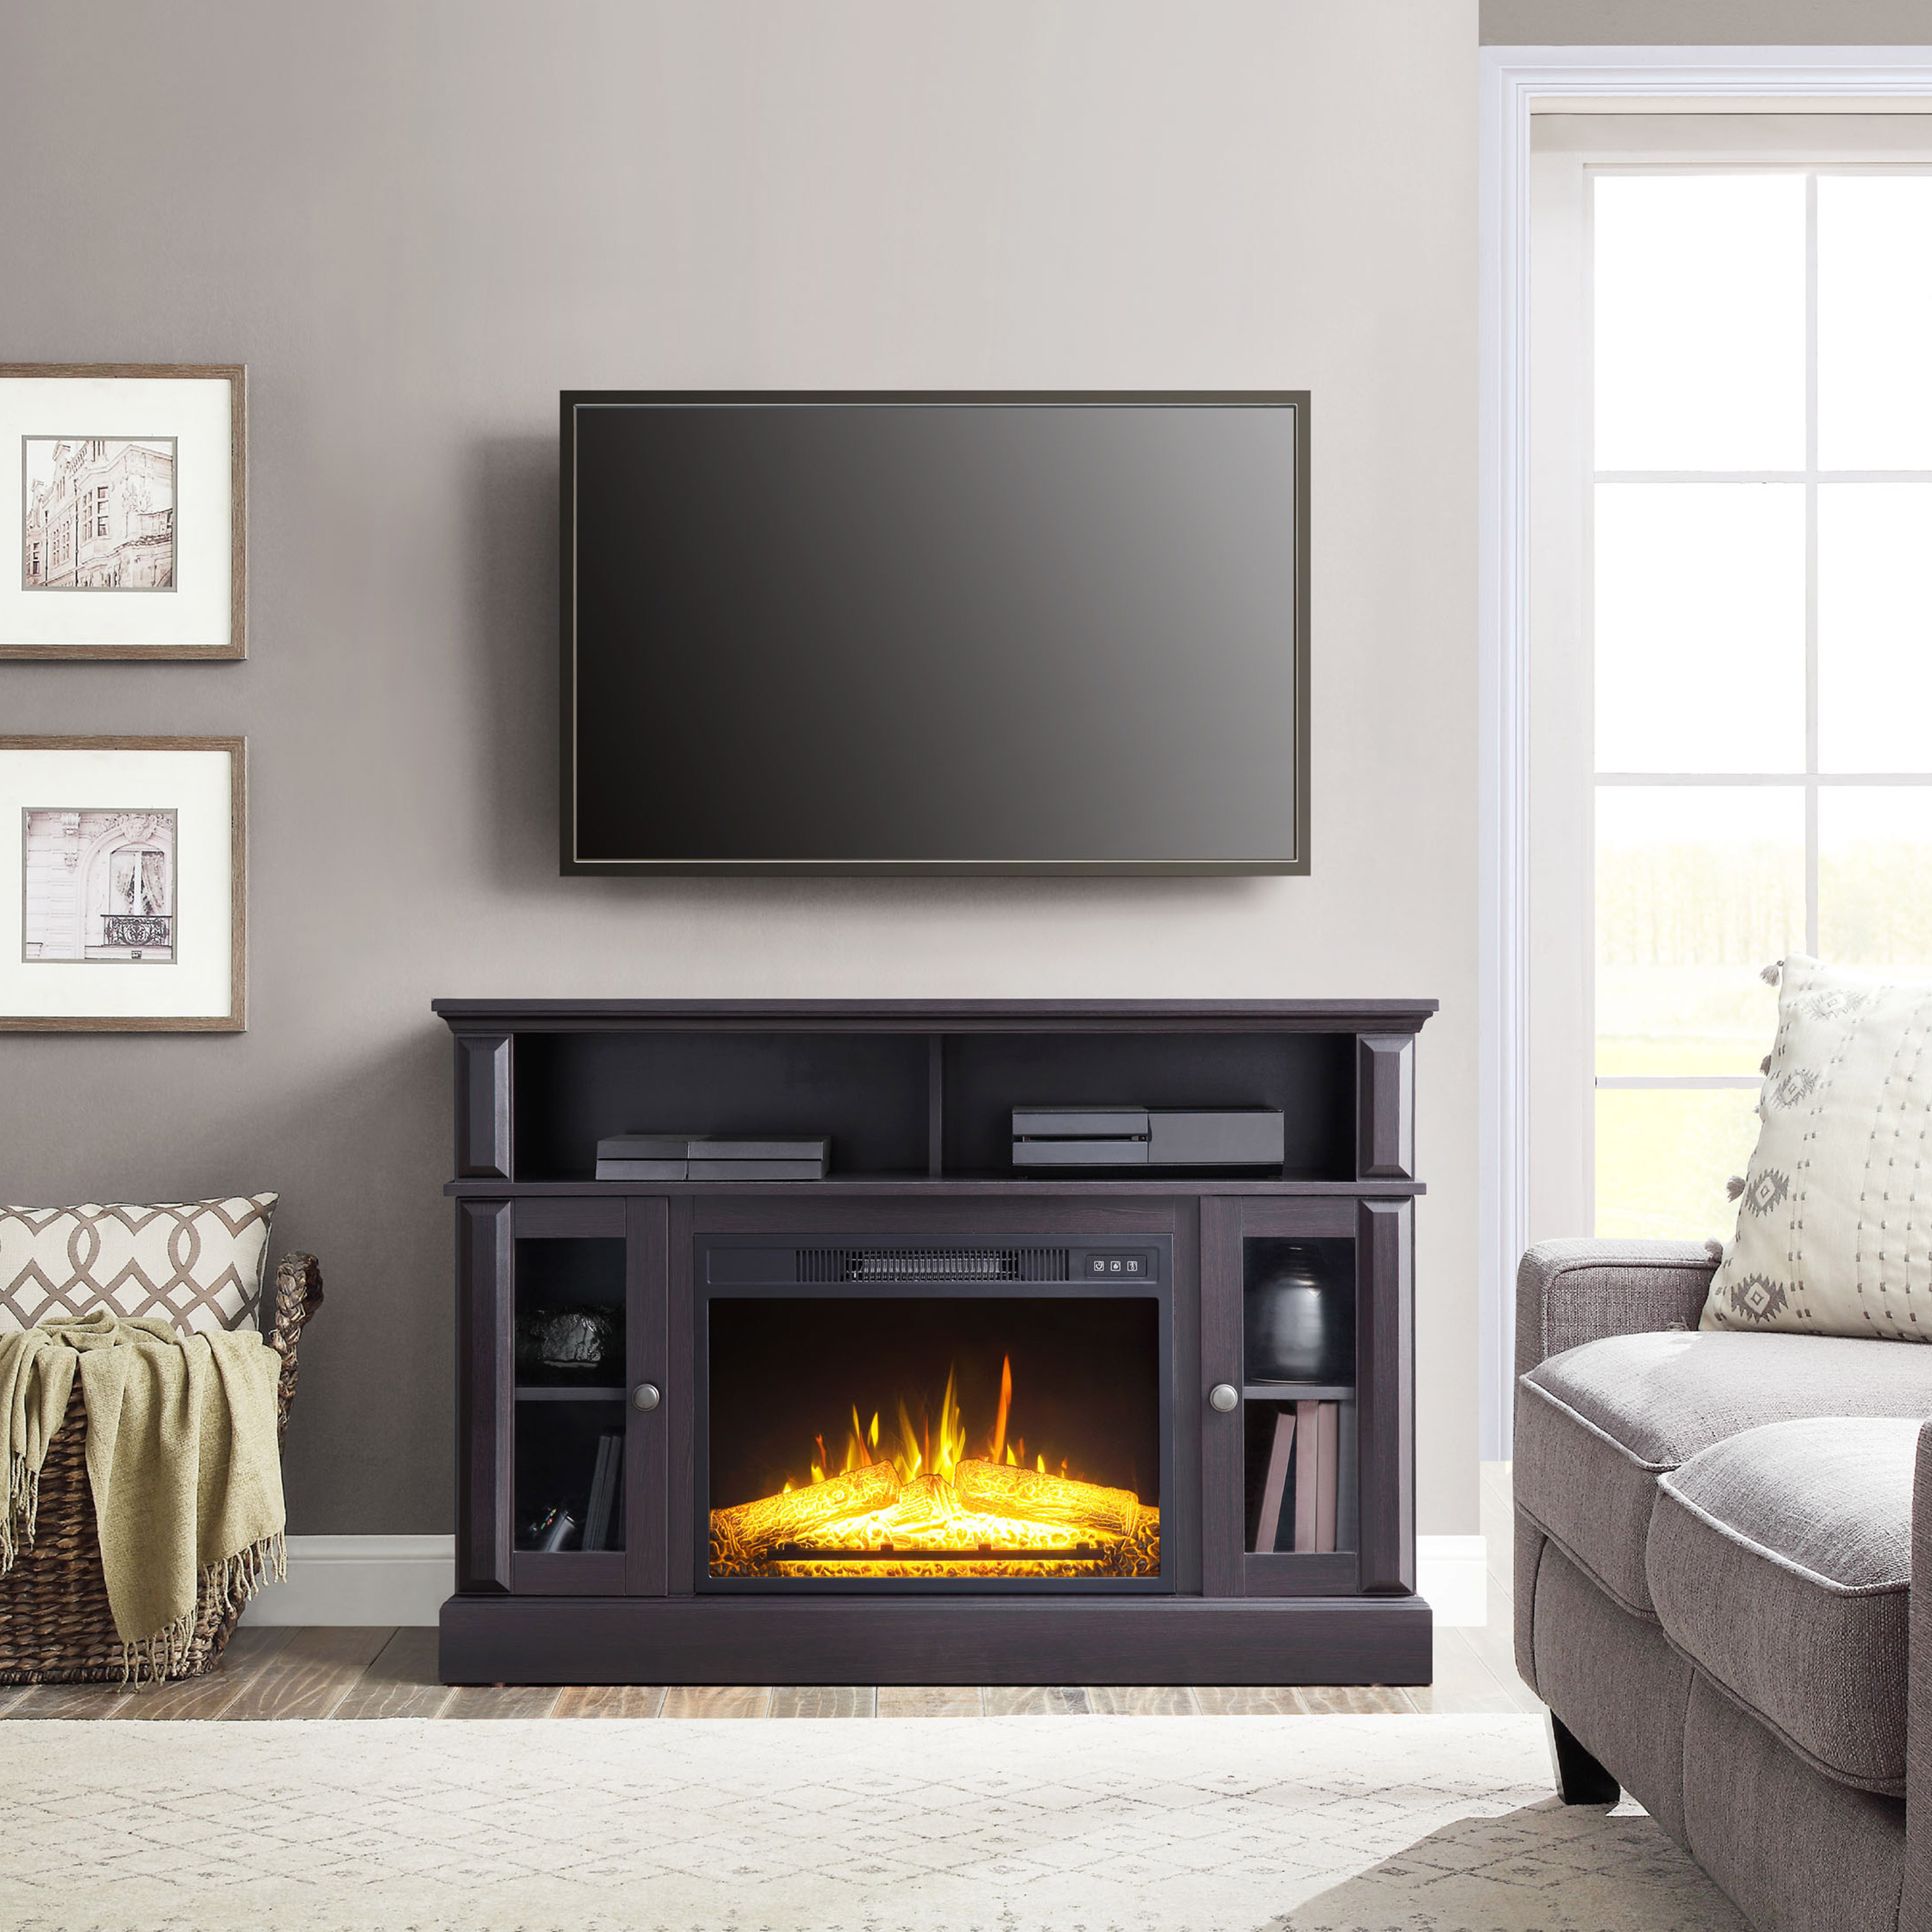 Whalen Barston Media Fireplace Console for TV's up to 55”, Espresso Finish - image 4 of 11